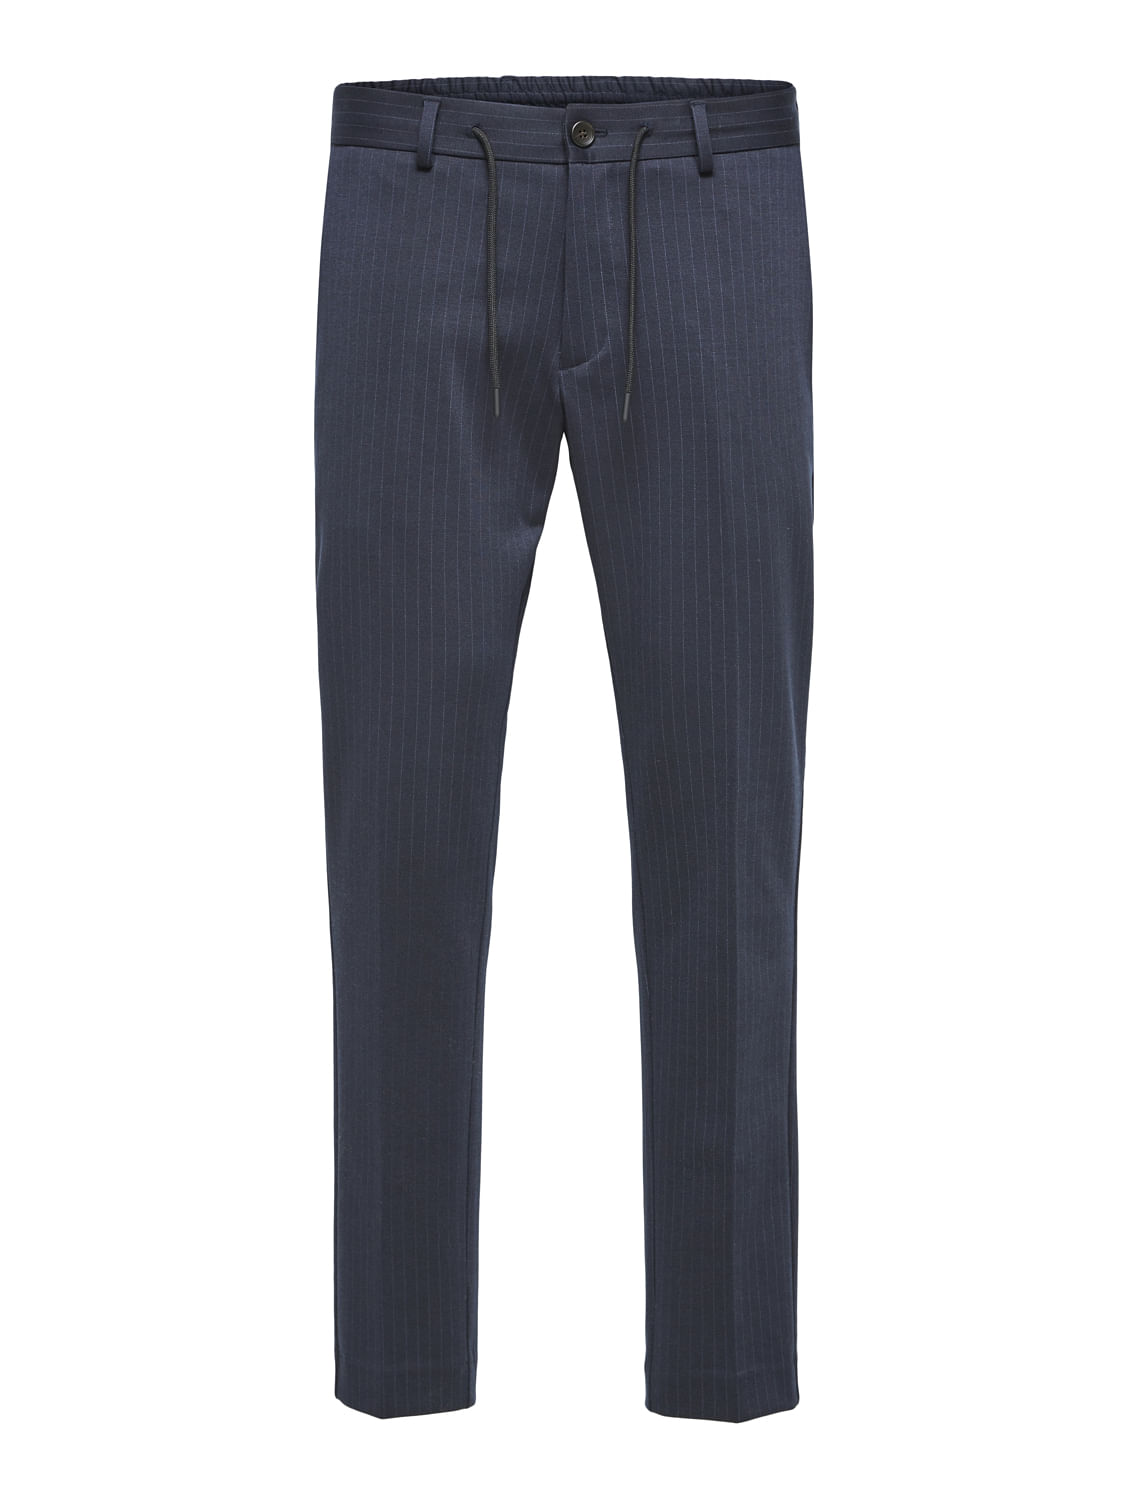 Buy Allen Solly Blue Slim Fit Striped Trousers for Mens Online  Tata CLiQ